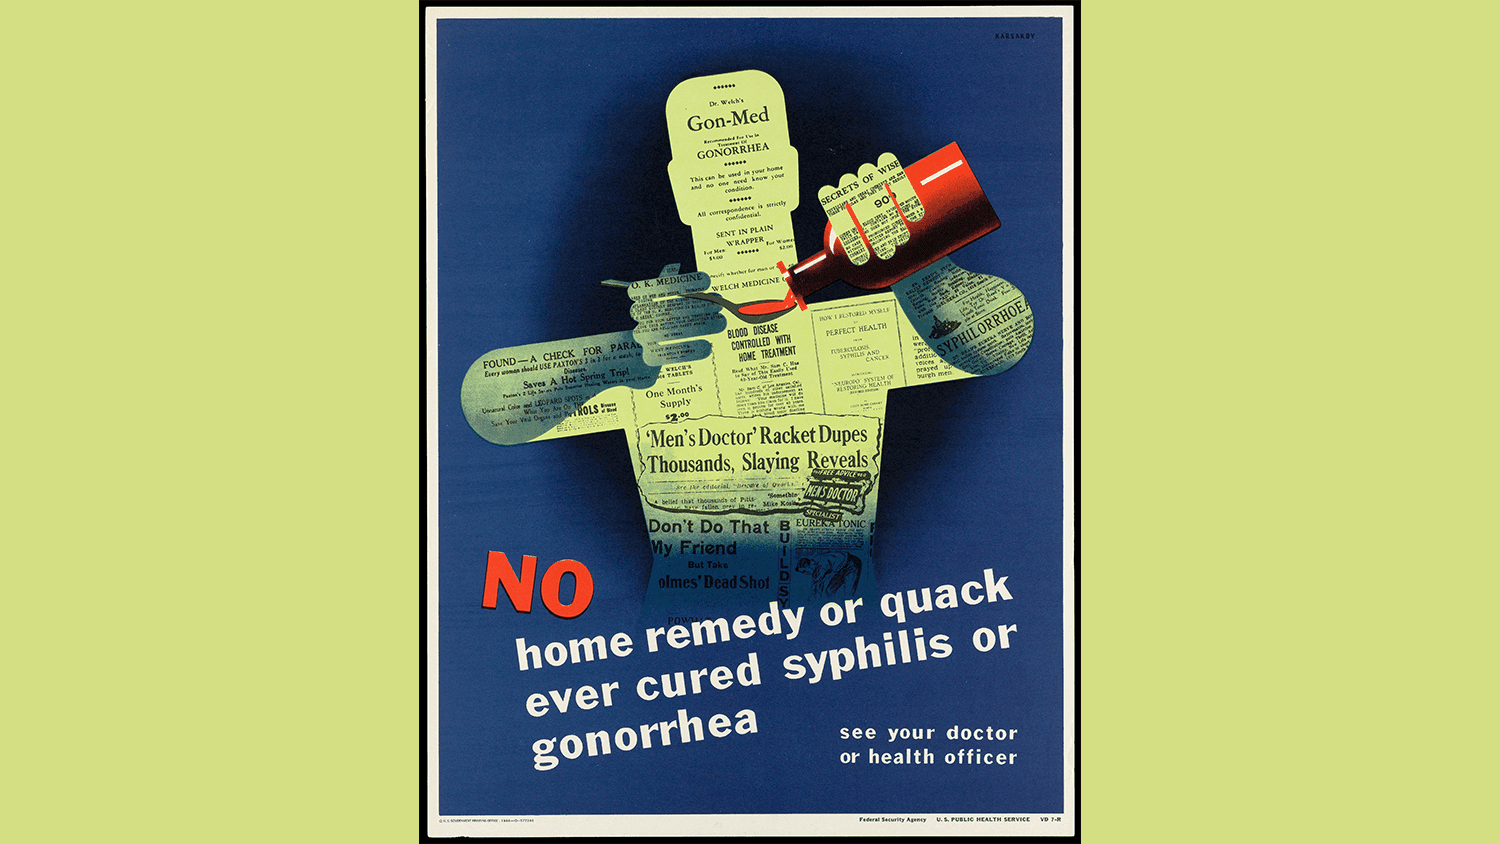 Colour lithograph from 1944 that says "No home remedy or quack ever cured syphilis or gonorrhea, see your doctor now"